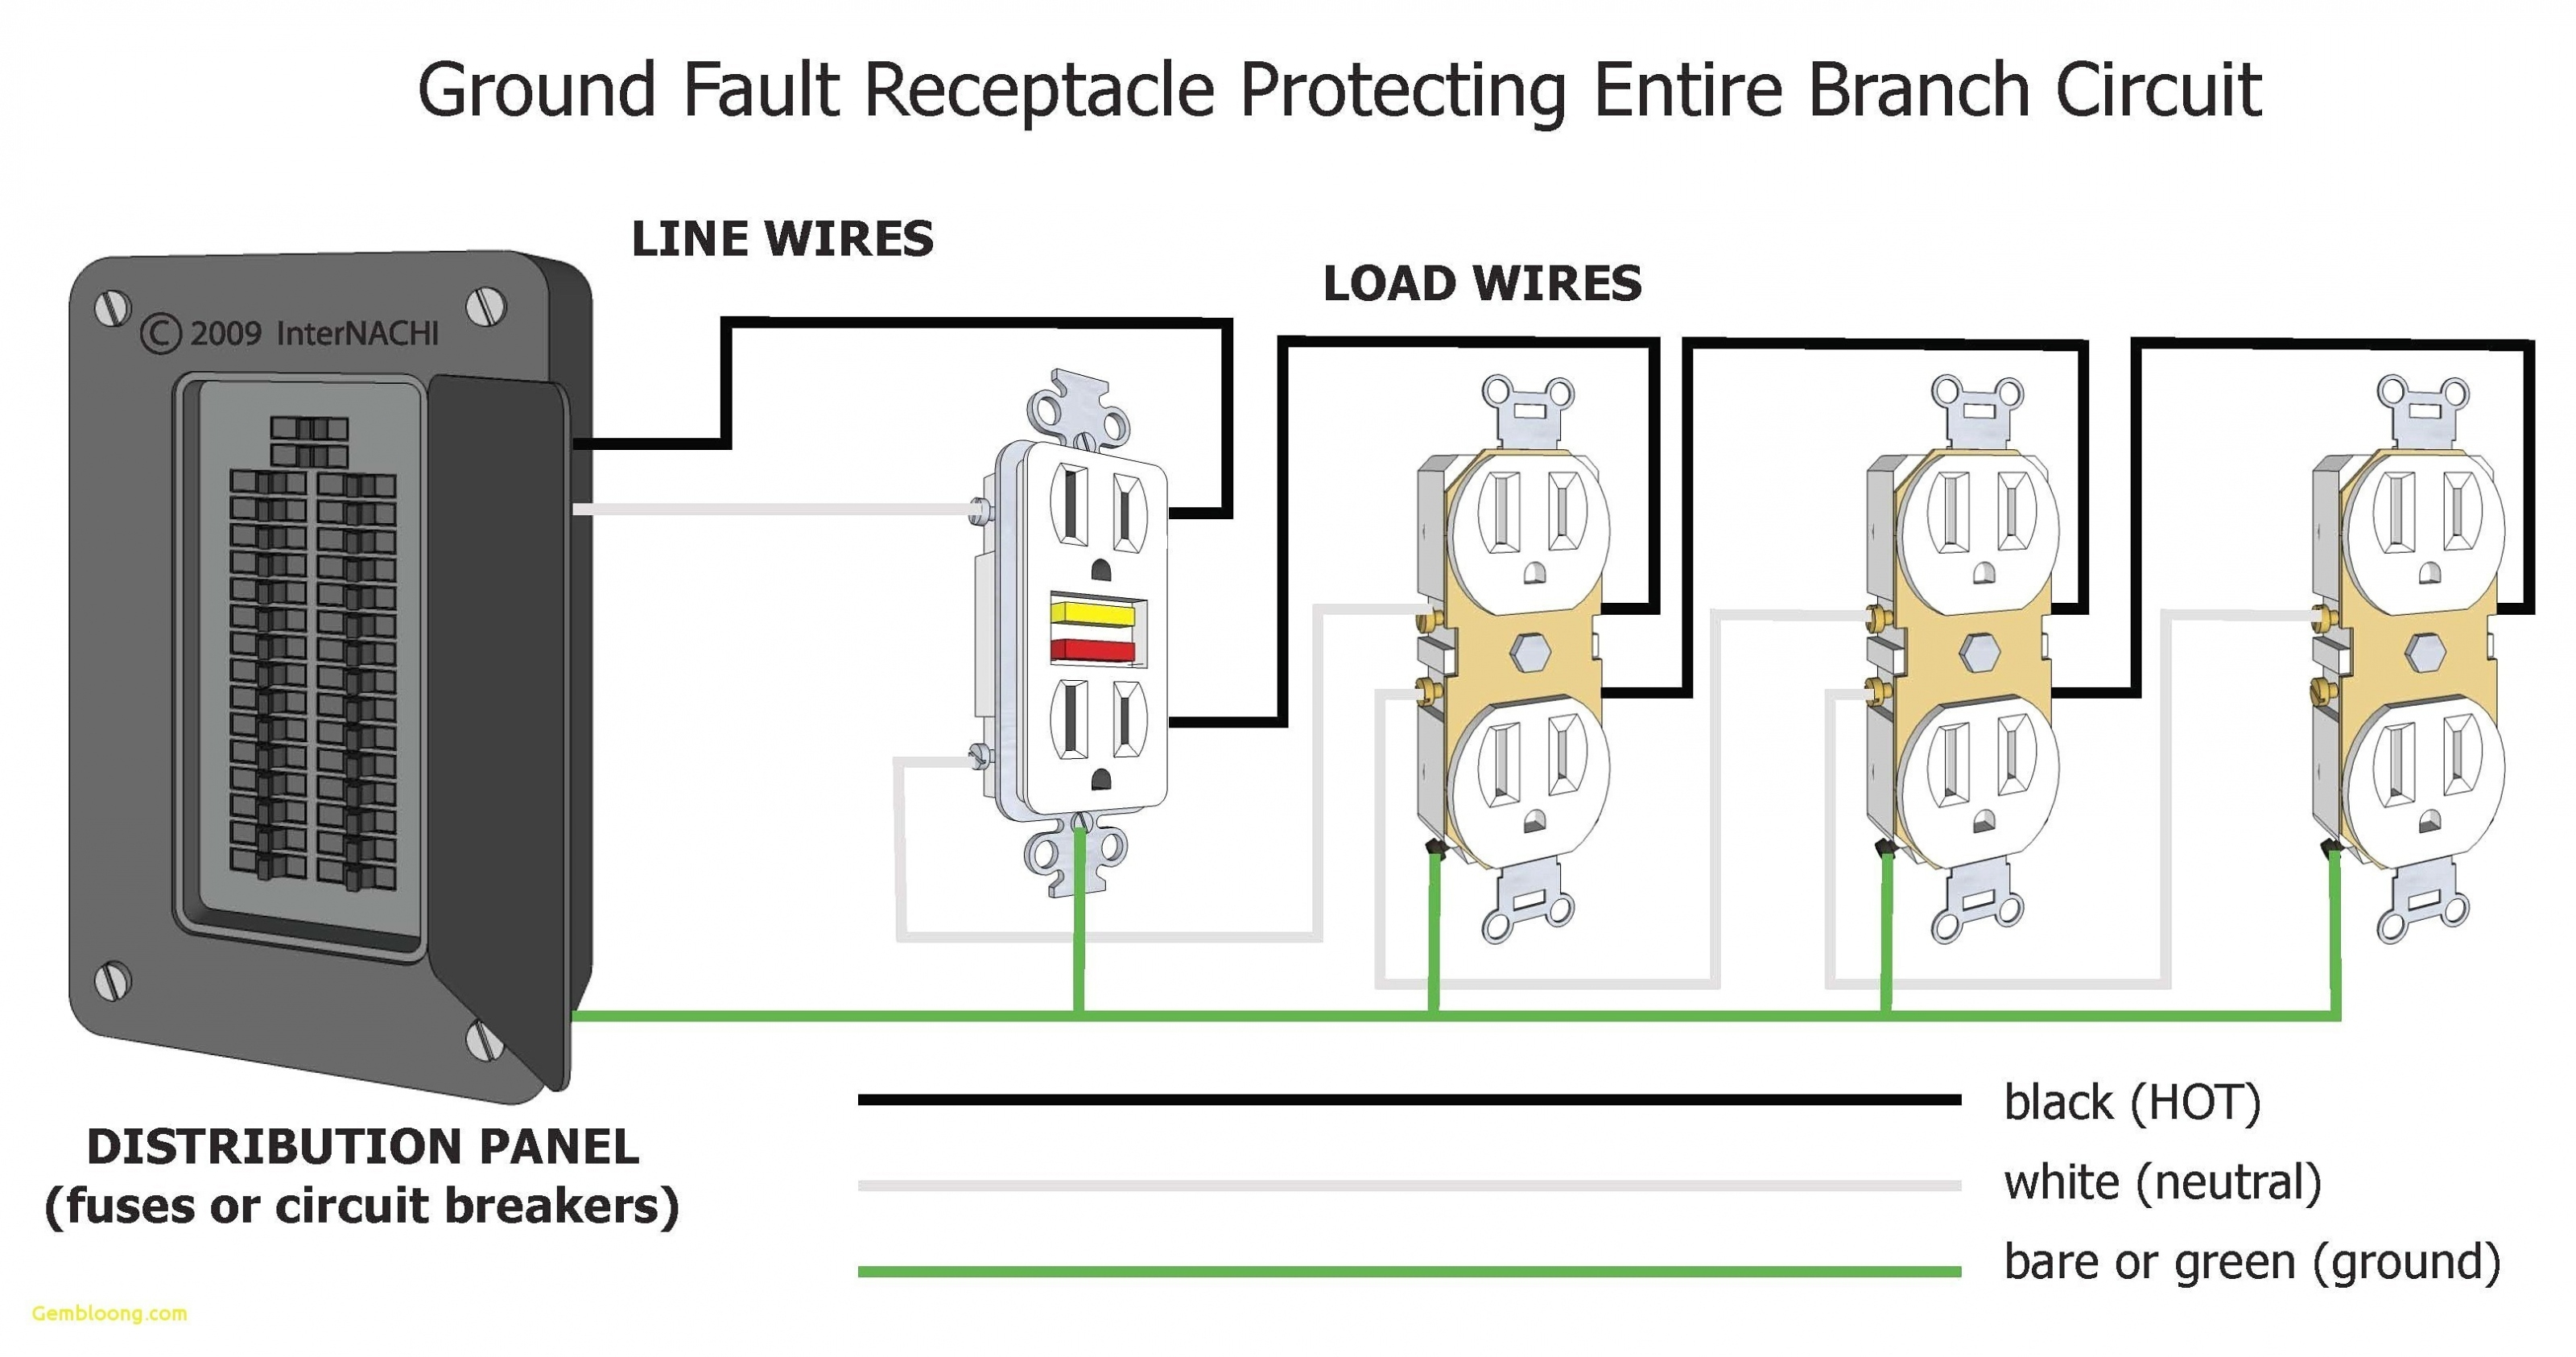 Wiring Diagram Outlet To Switch To Light Best Wiring Diagram - Light Switch To Outlet Wiring Diagram